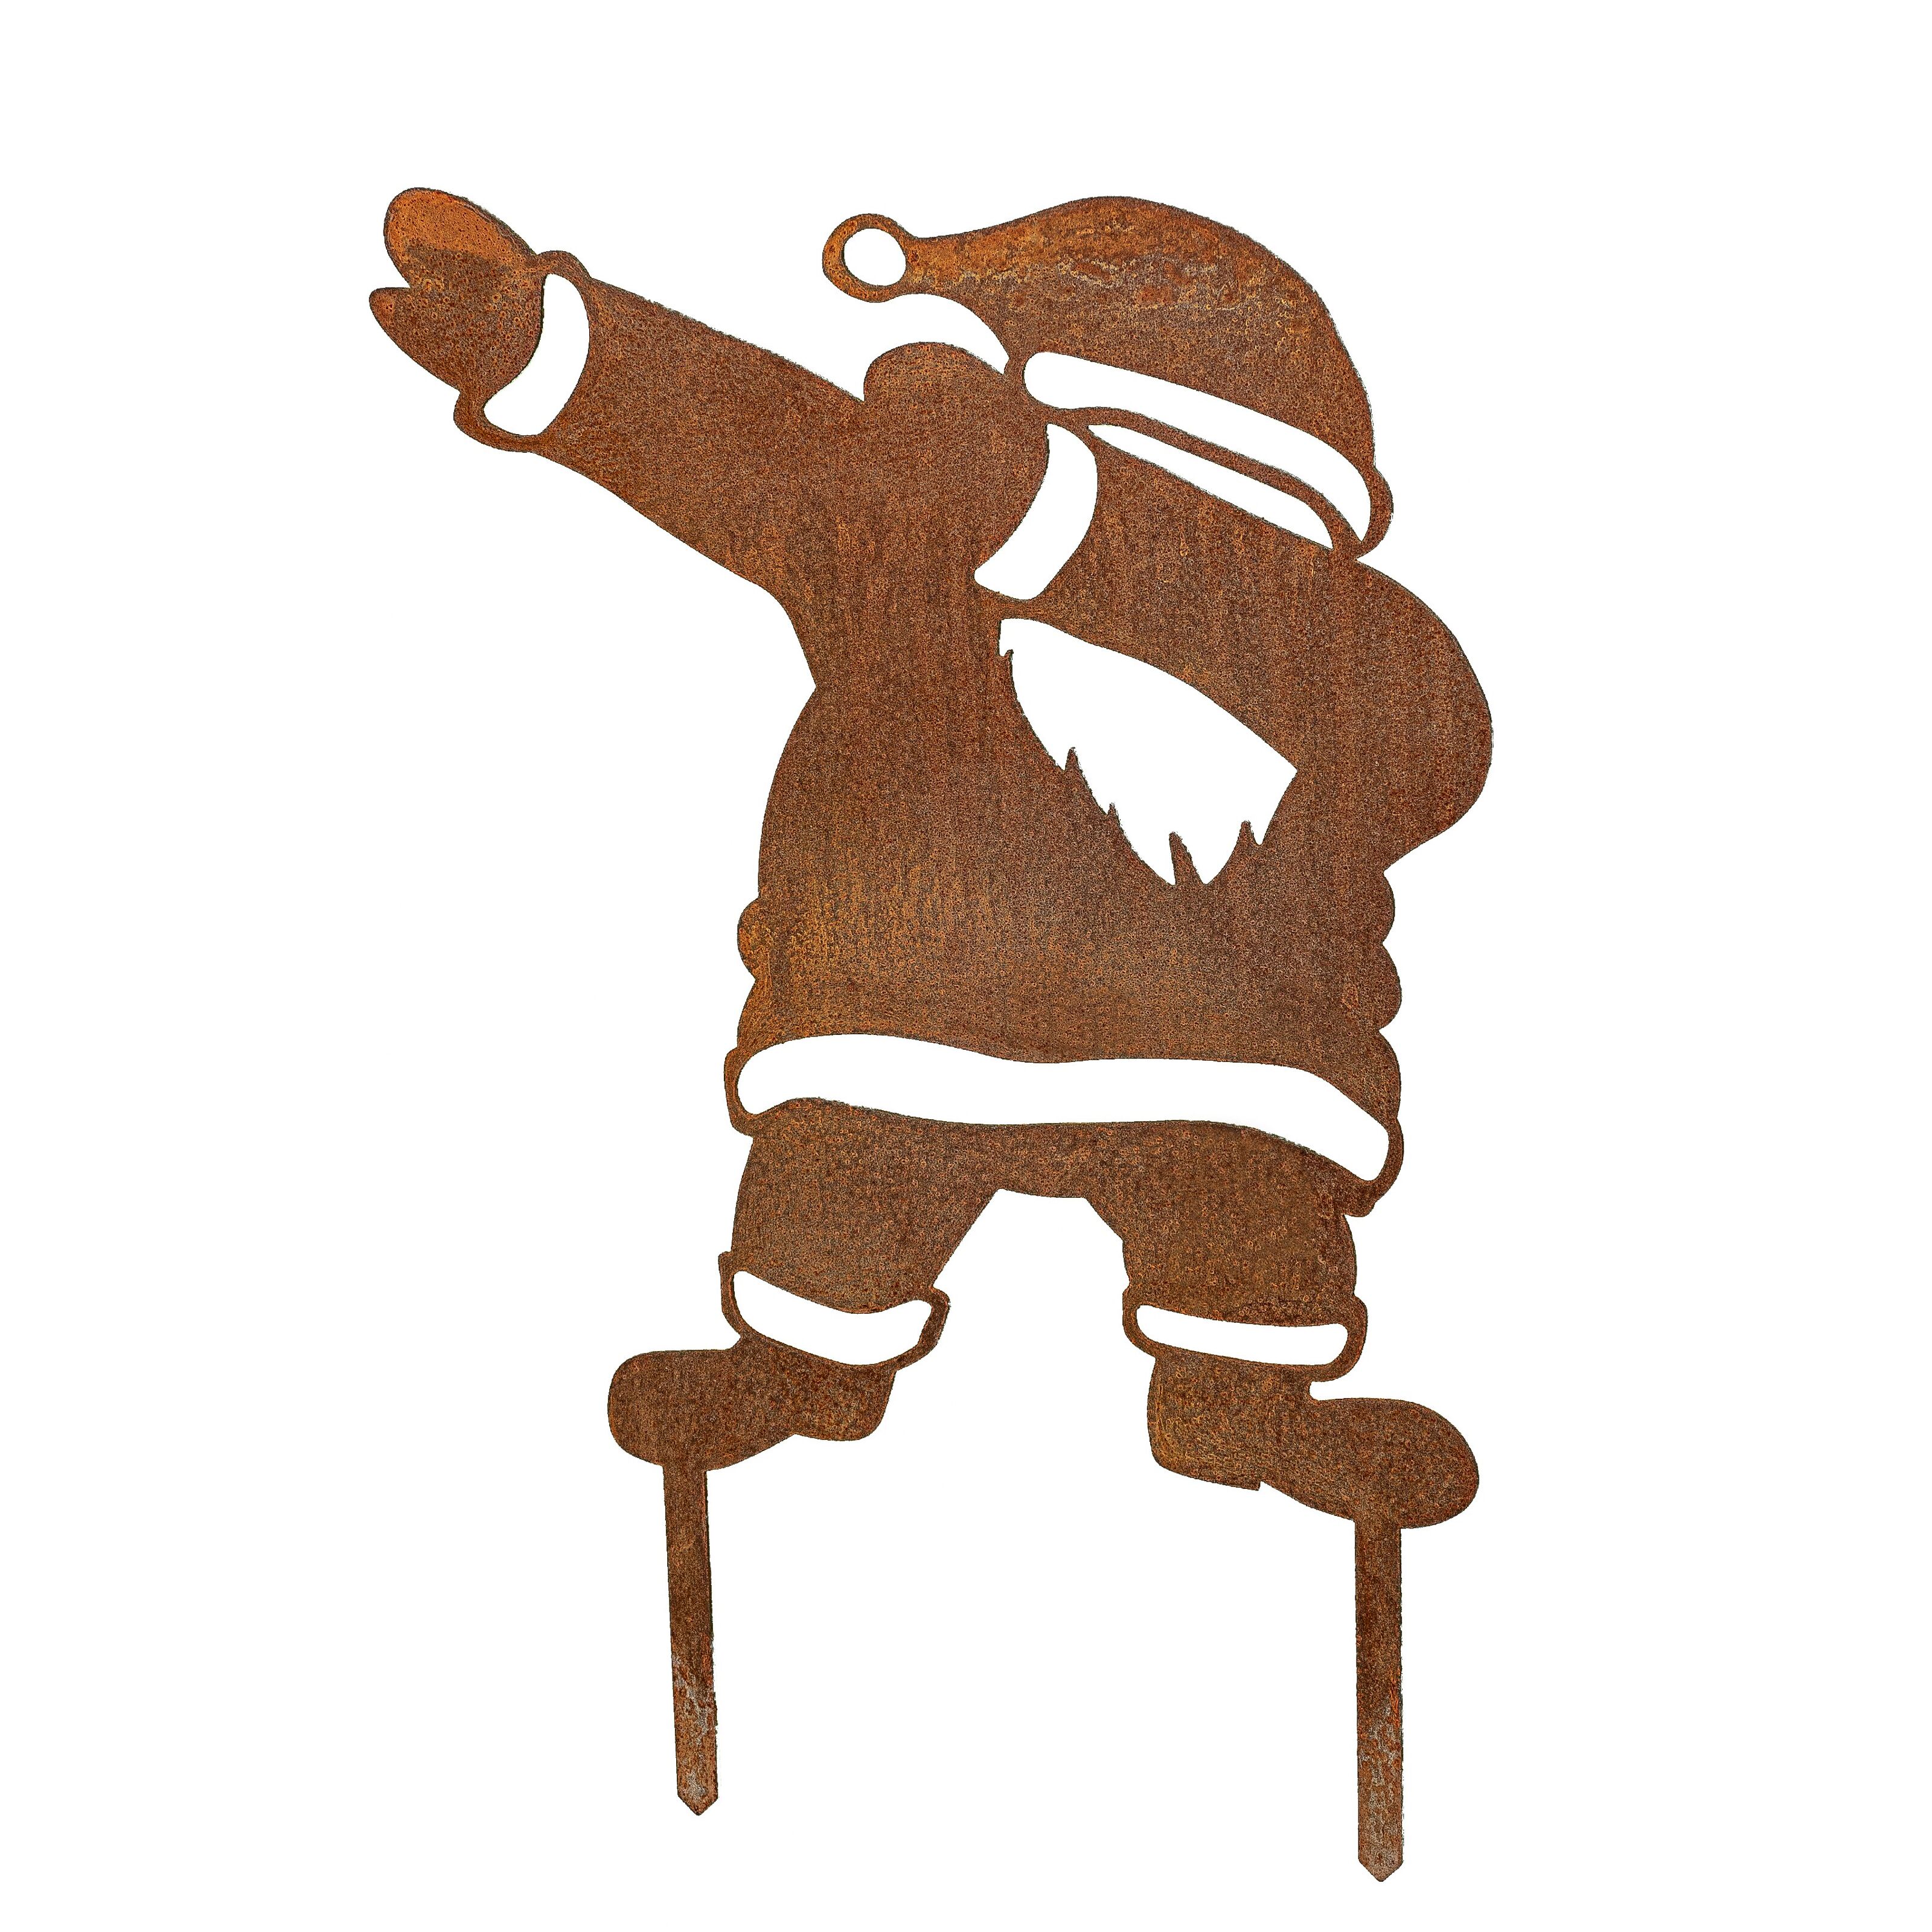 - of Stake Christmas rust corten - Buy Garden Styles decoration garden MM made wholesale easy to Claus Santa steel high-quality rust decoration decoration insert Funny Steel /